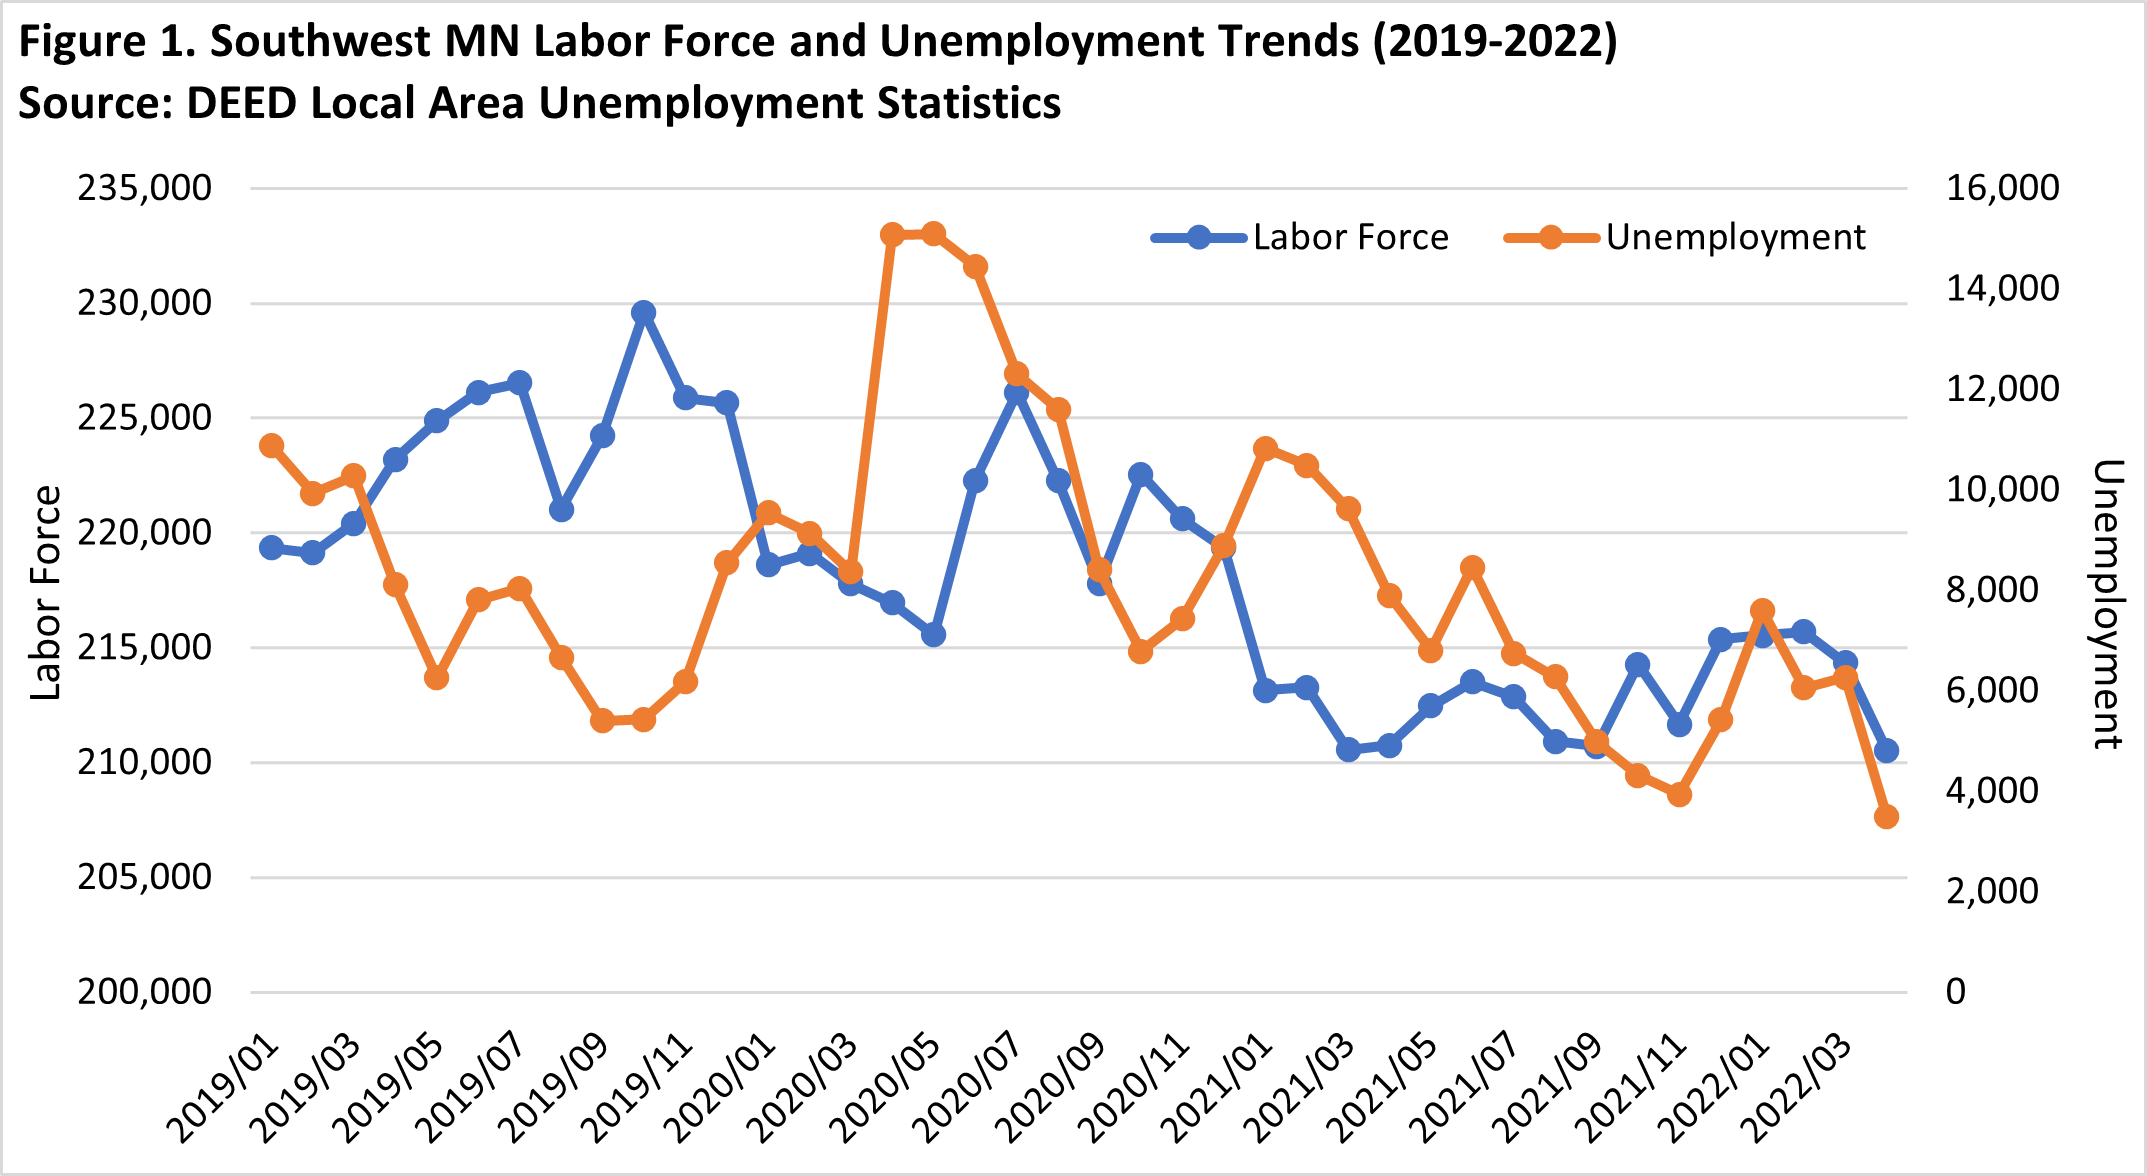 Southwest MN Labor Force and Unemployment Trends